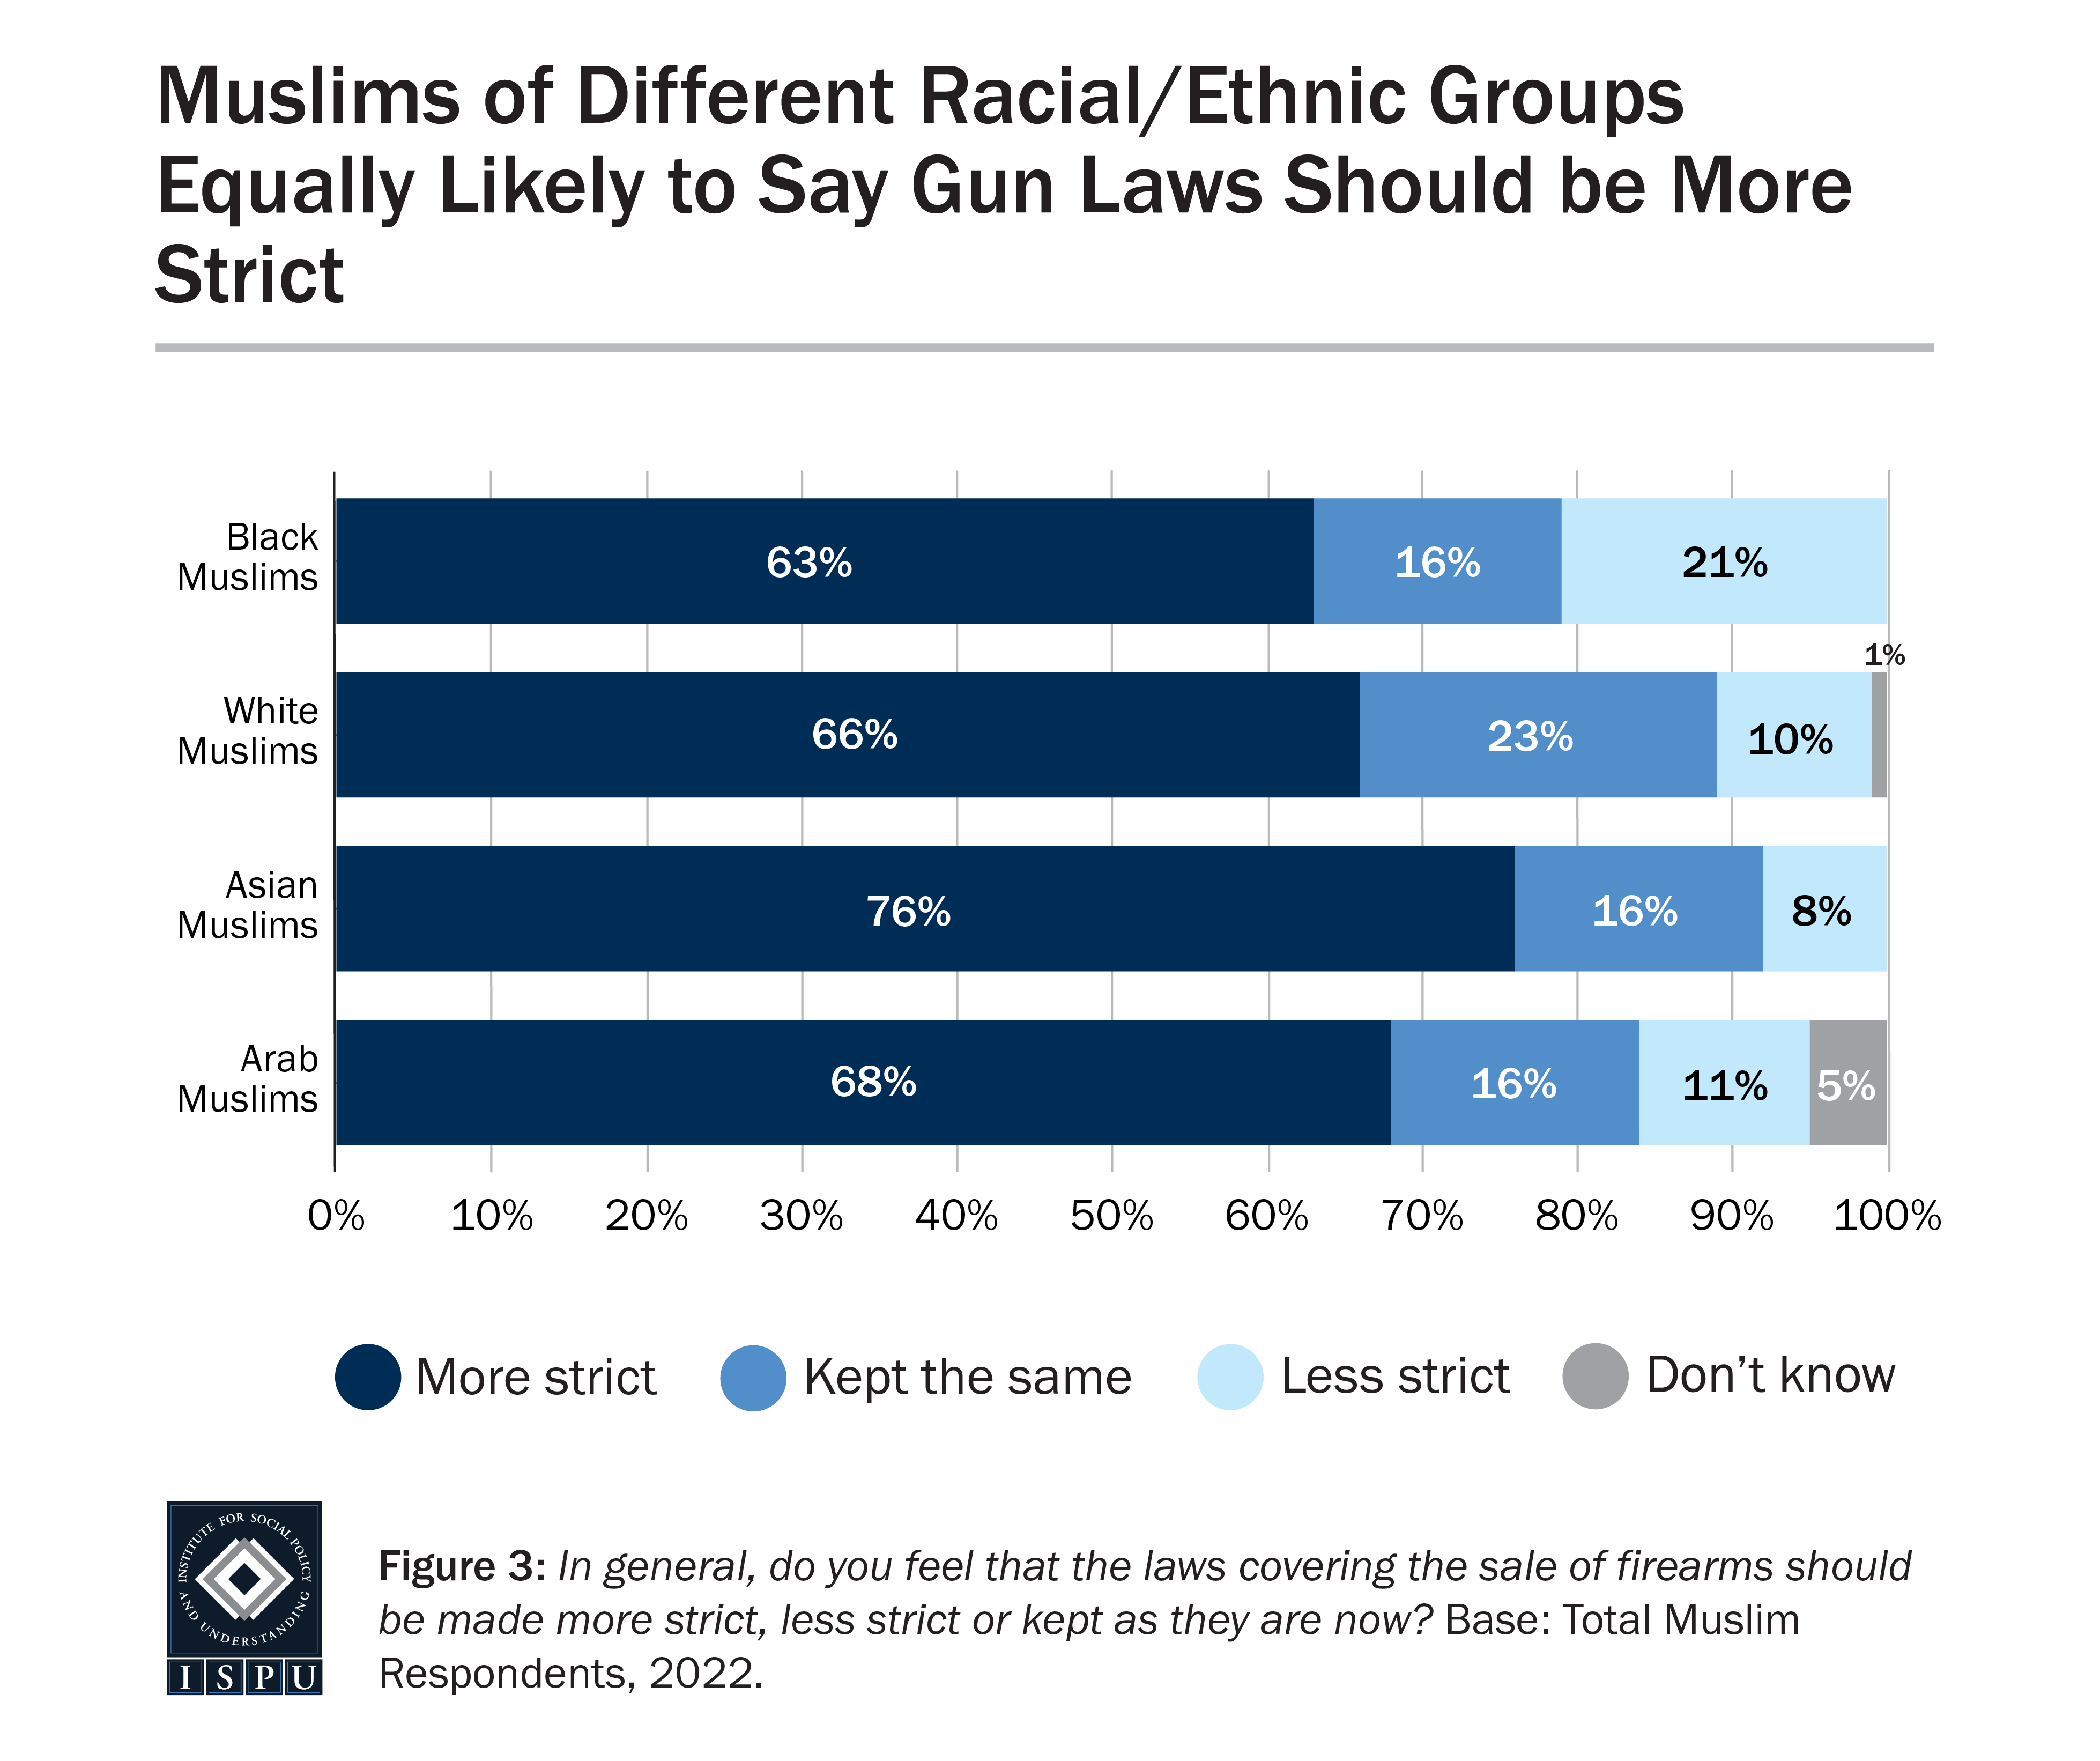 Graph displaying: Black, white, Arab, and Asian Muslims equally likely to say gun control laws should be stricter